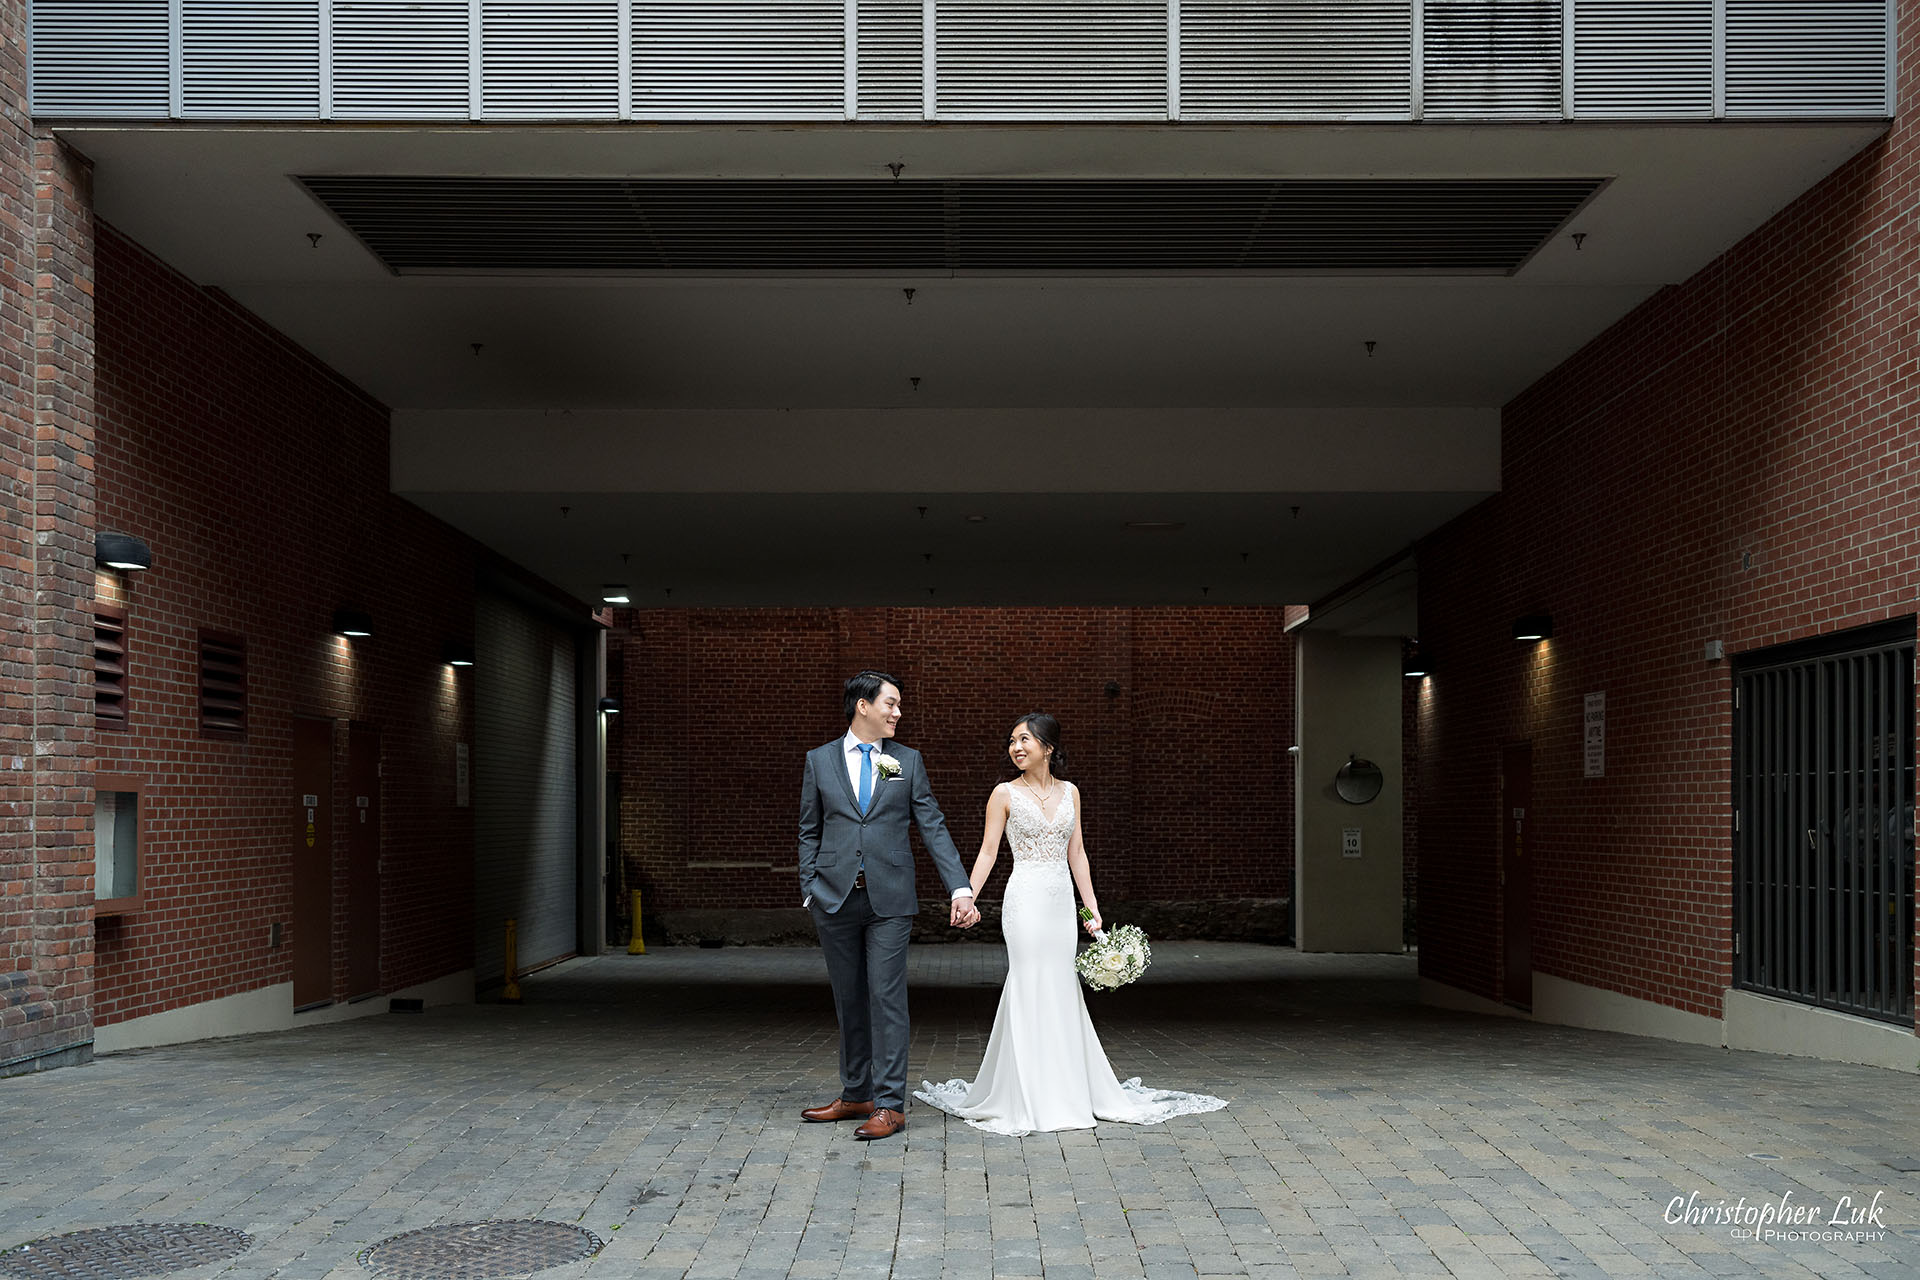 Bride Groom Wedding Holding Hands Walking Together Candid Natural Organic Photojournalistic Streetscape Downtown Toronto Front Street St Lawrence Market Architecture Red Brick Landscape